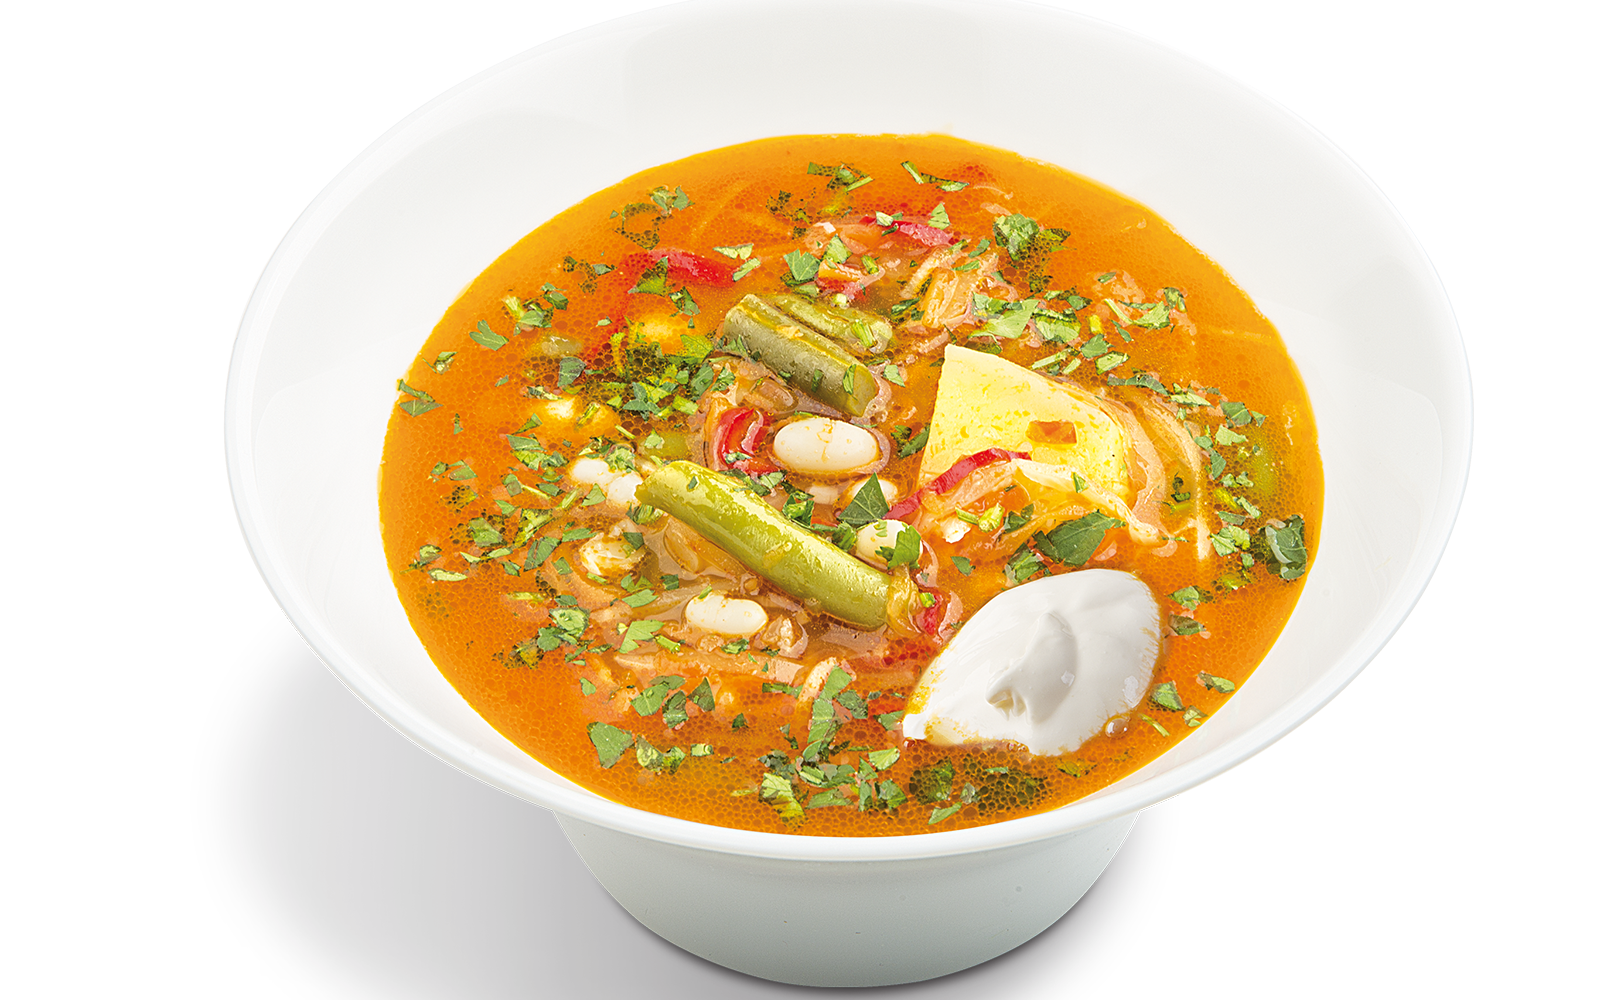 Delicious Soups with delivery to your home or office